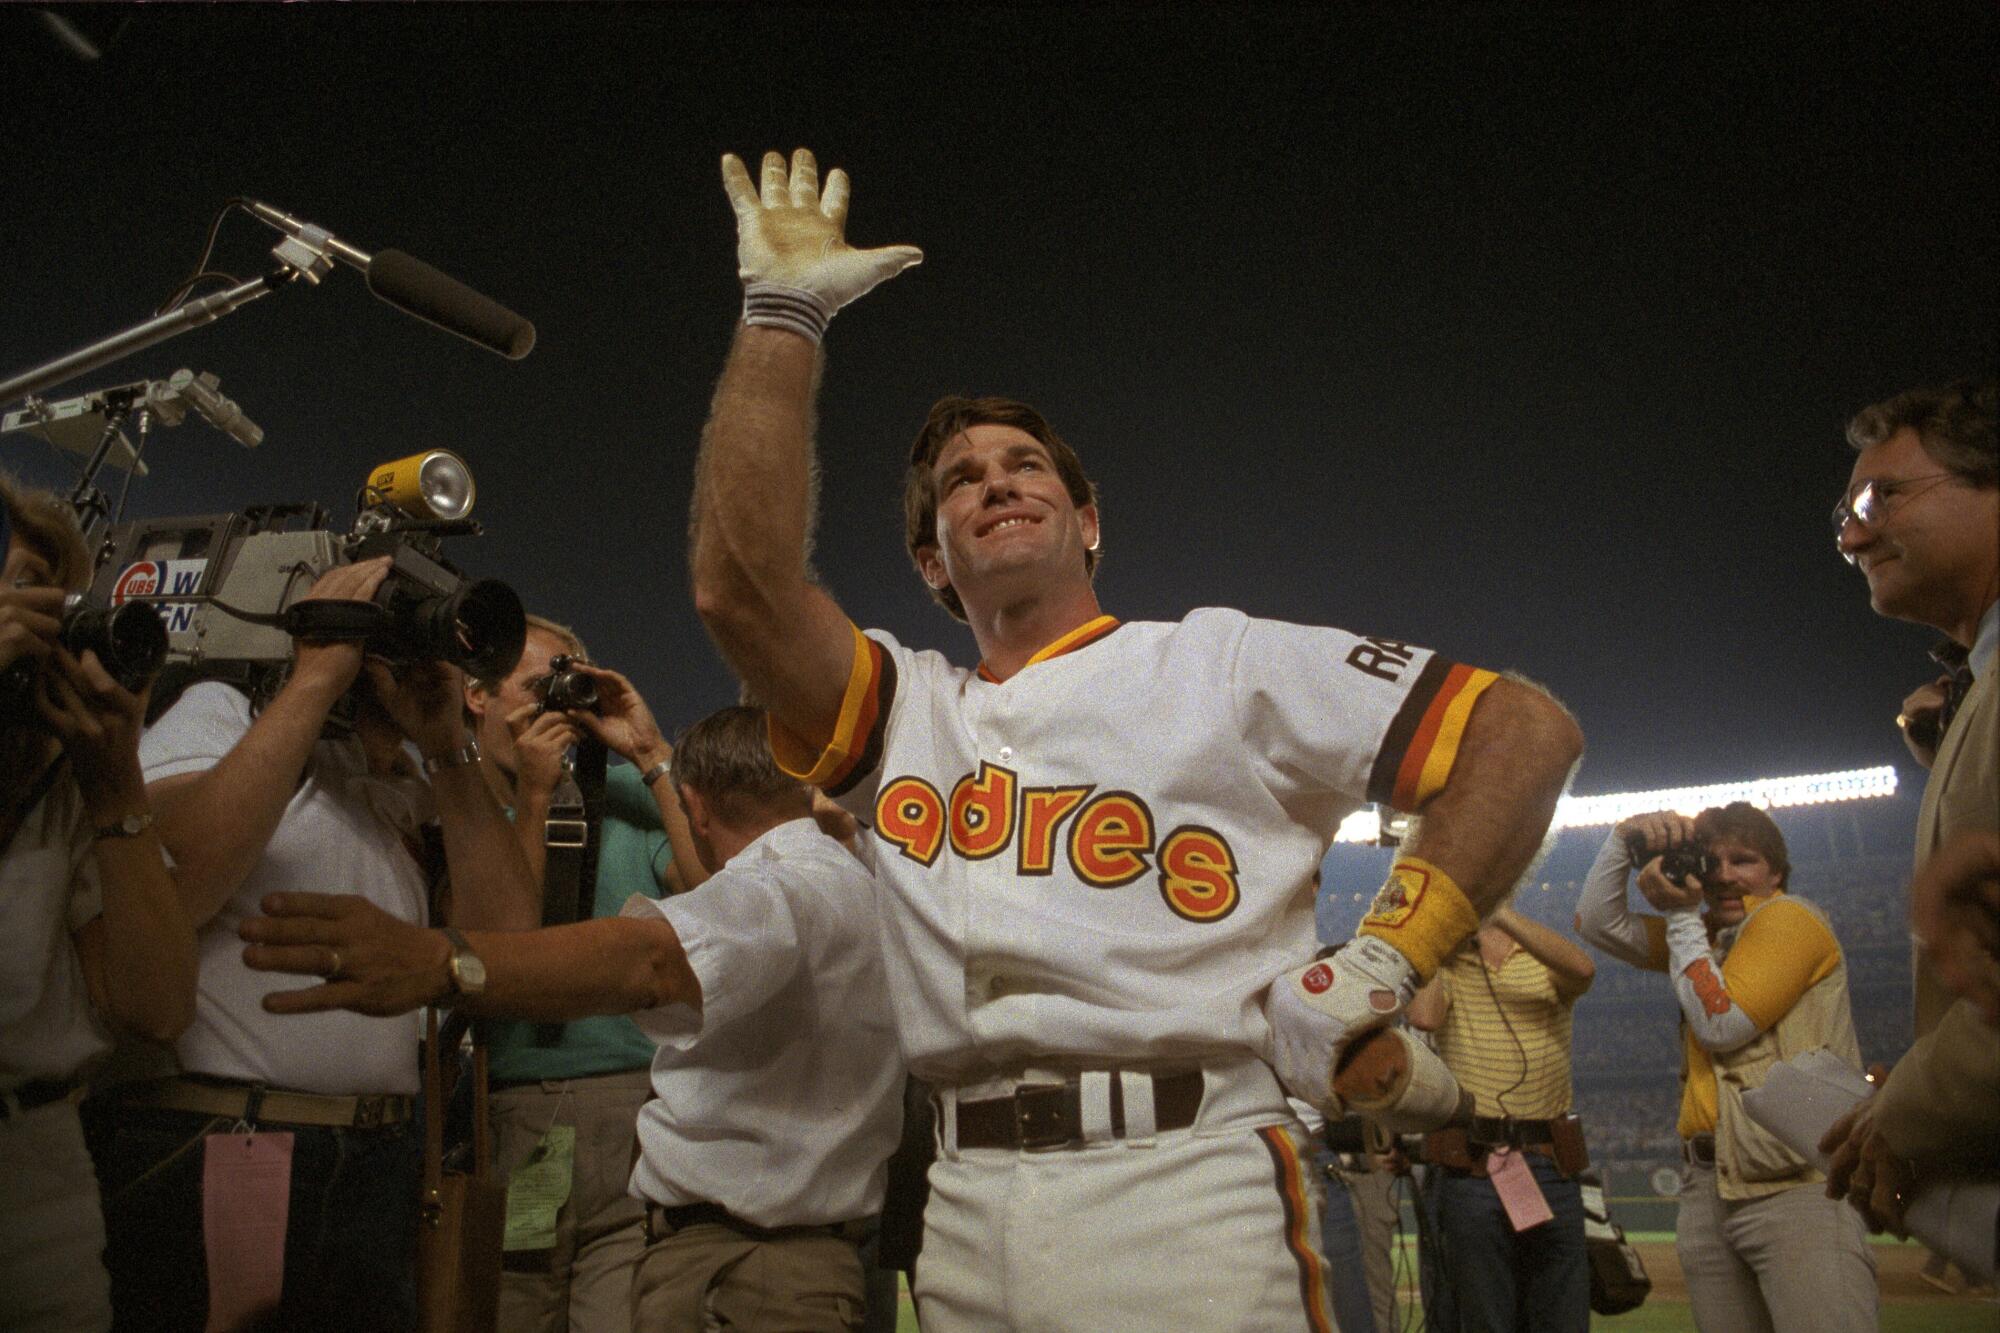 Steve Garvey waves while sporting the Padres' uniform from 1984, when they went to the World Series.